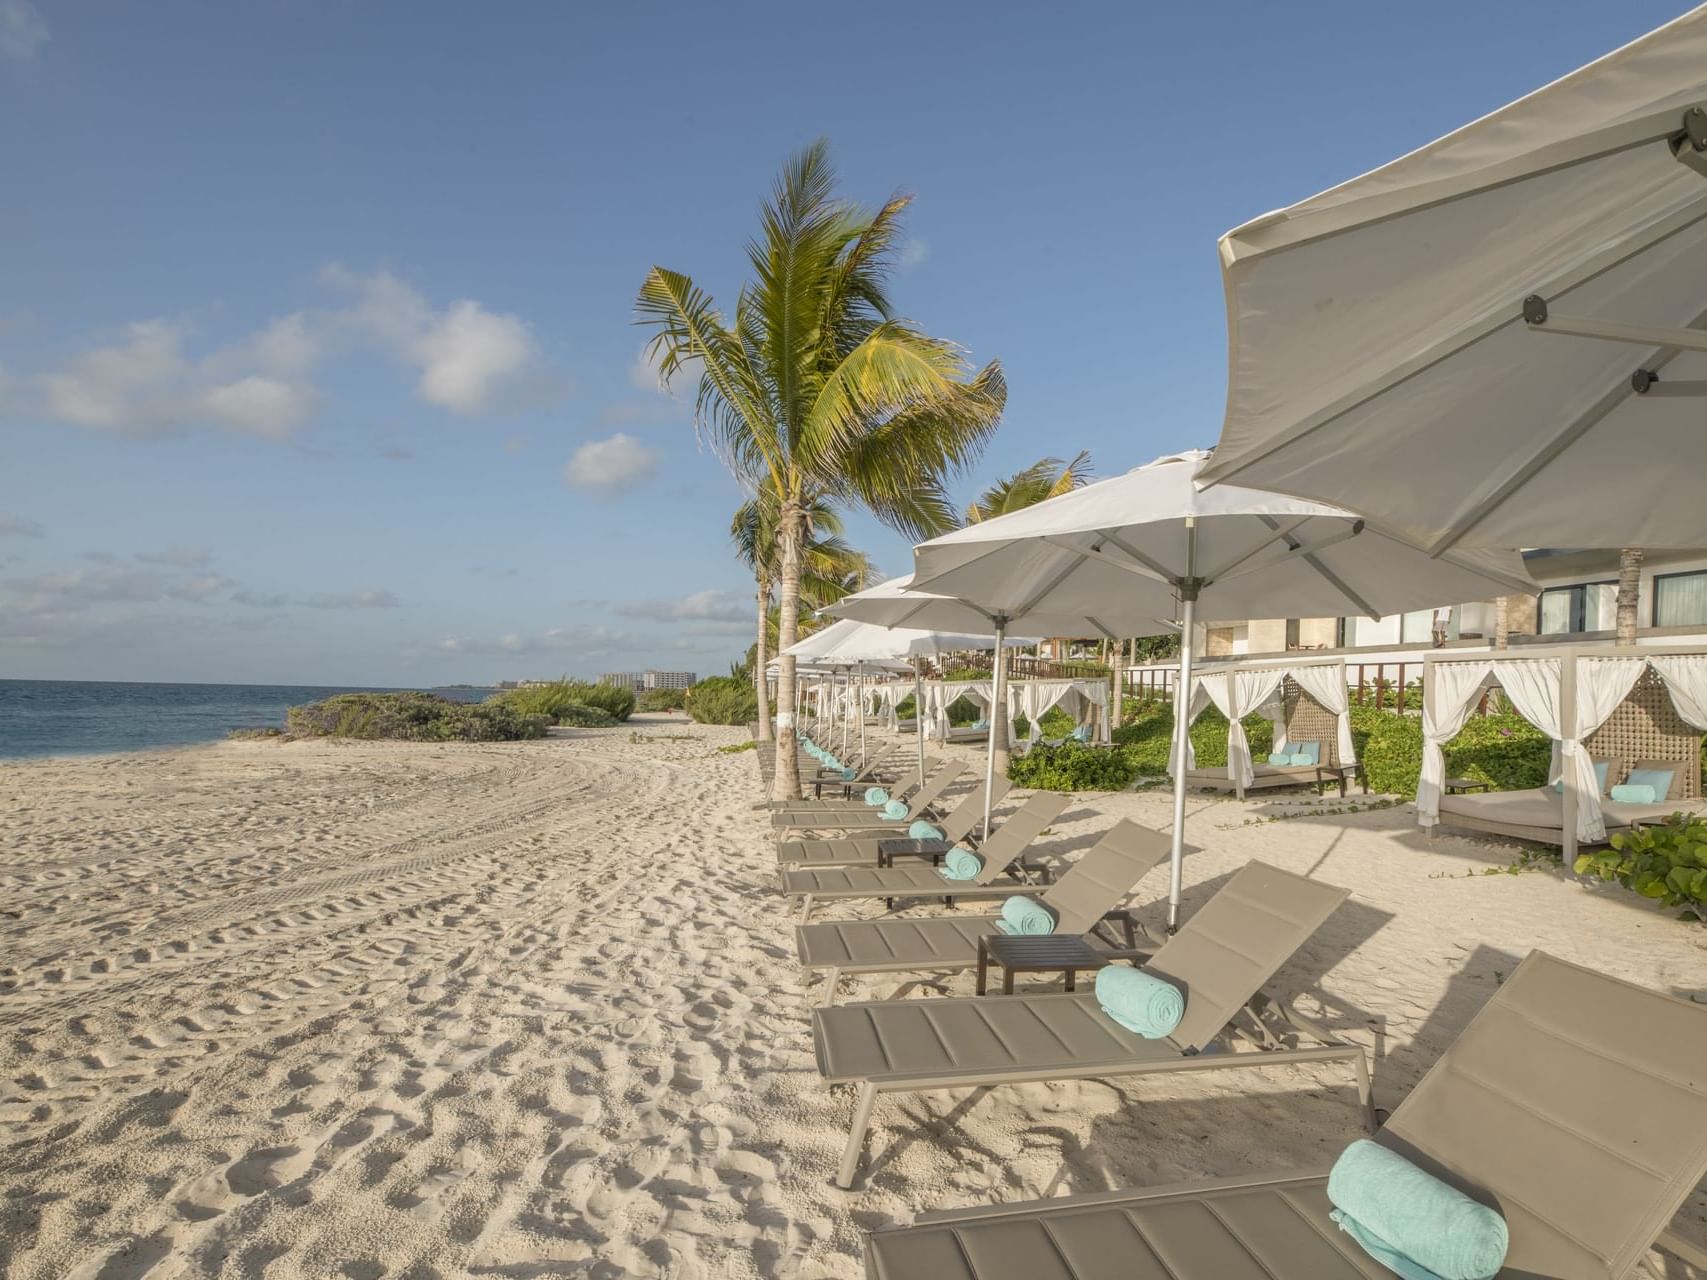 Sunloungers with canopies on the beach at Haven Riviera Cancun